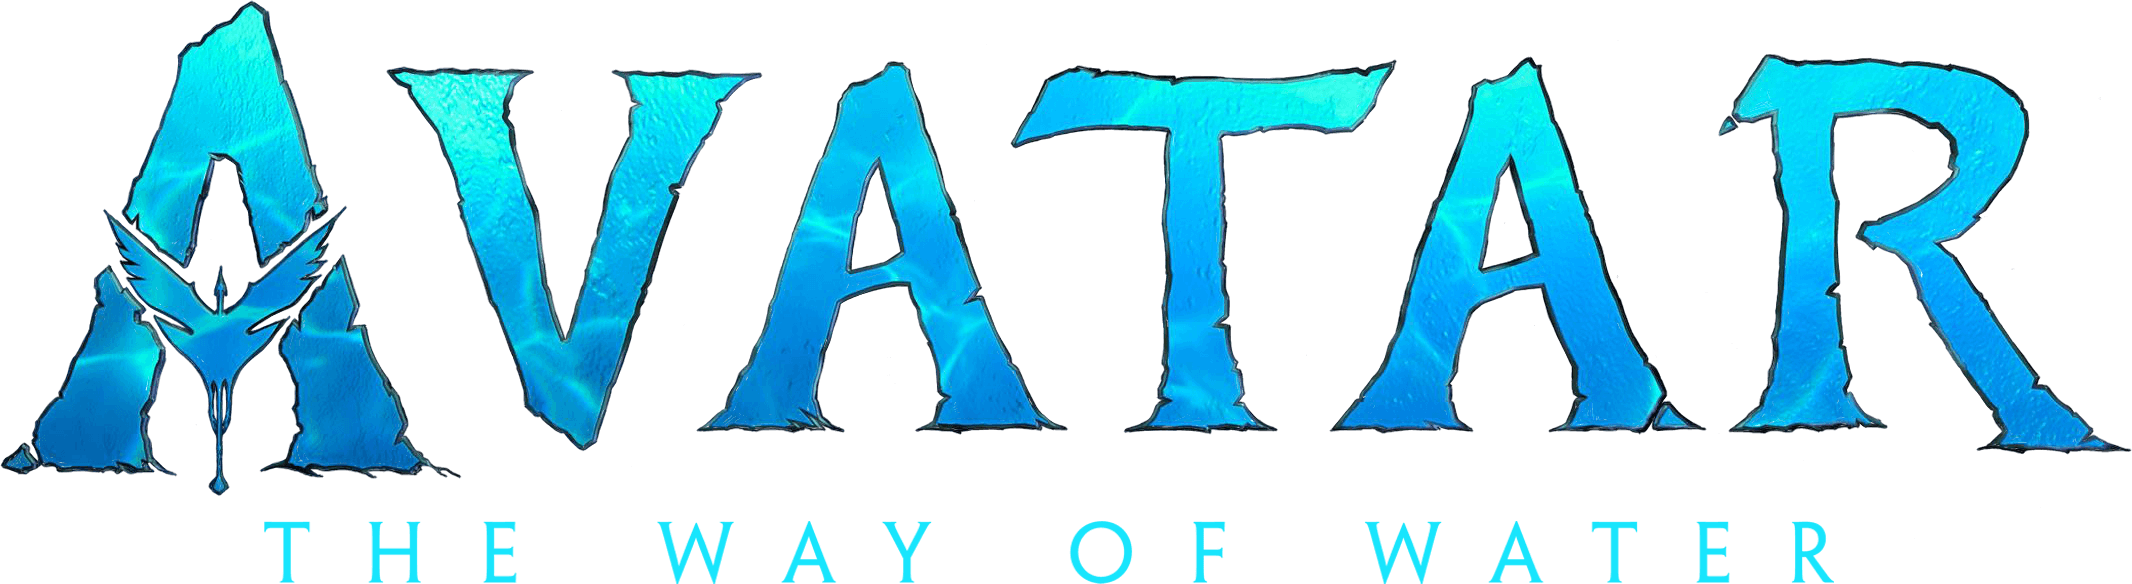 Avatar: The Way of Water logo